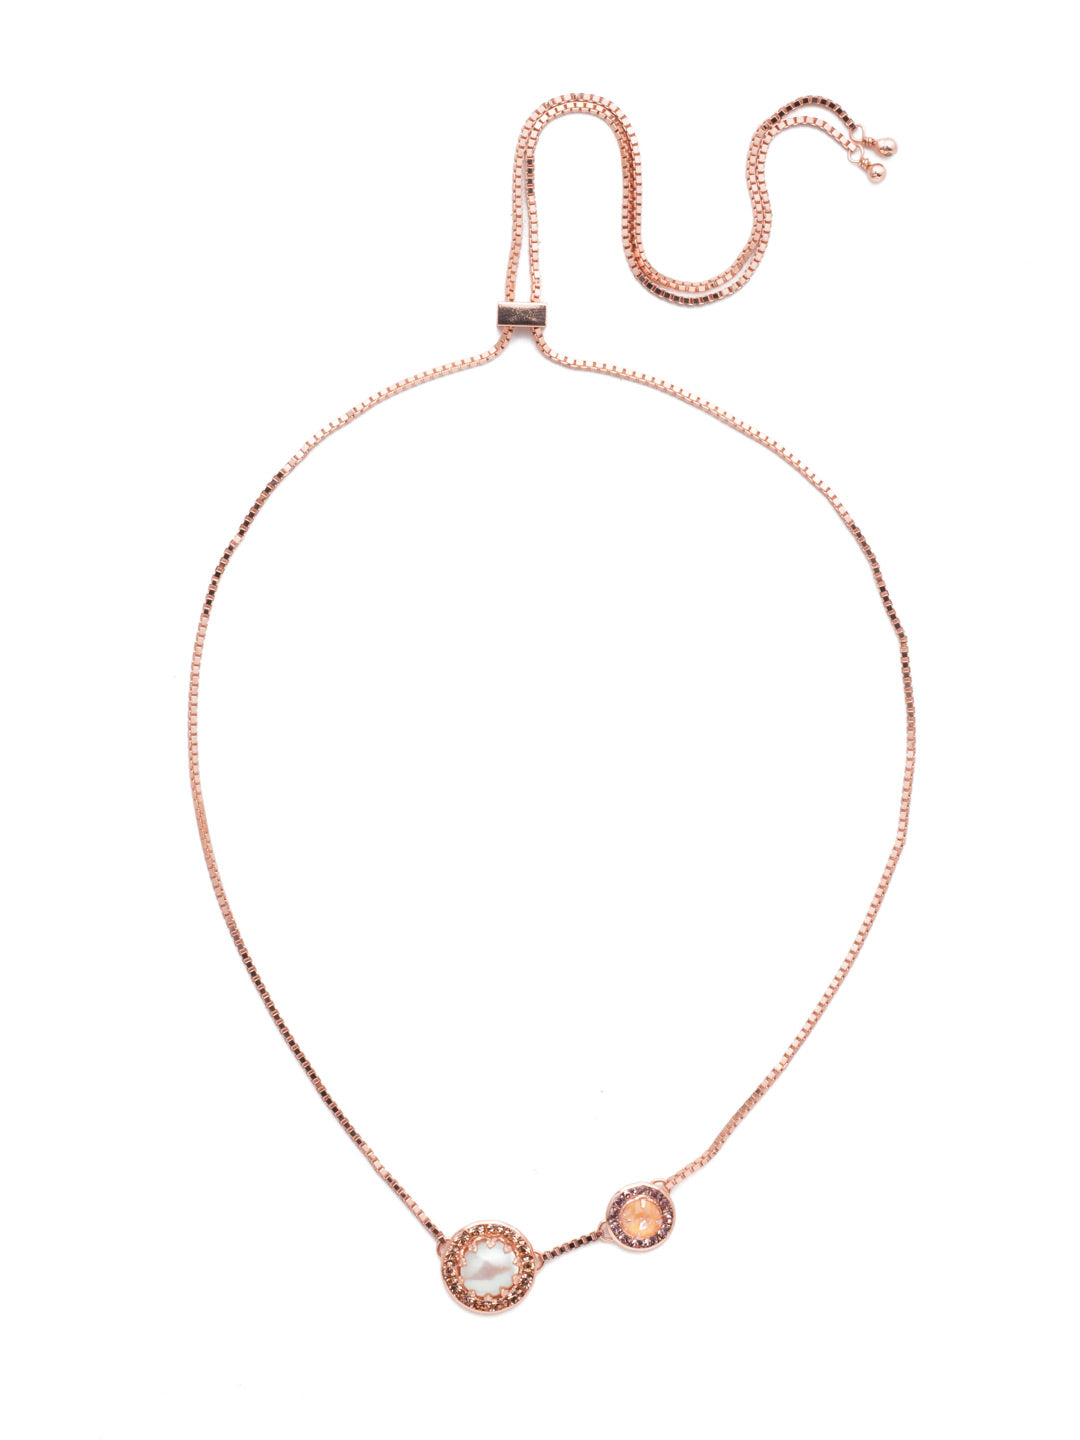 Dua Adjustable Pendant Necklace - NEB25RGLVP - <p>Two brilliant crystals bordered by smaller round crystals make up this simplistic yet glamorous choker, which can be adjusted to fit all sizes. Layer this necklace with others of varying lengths and shapes. From Sorrelli's Lavender Peach collection in our Rose Gold-tone finish.</p>